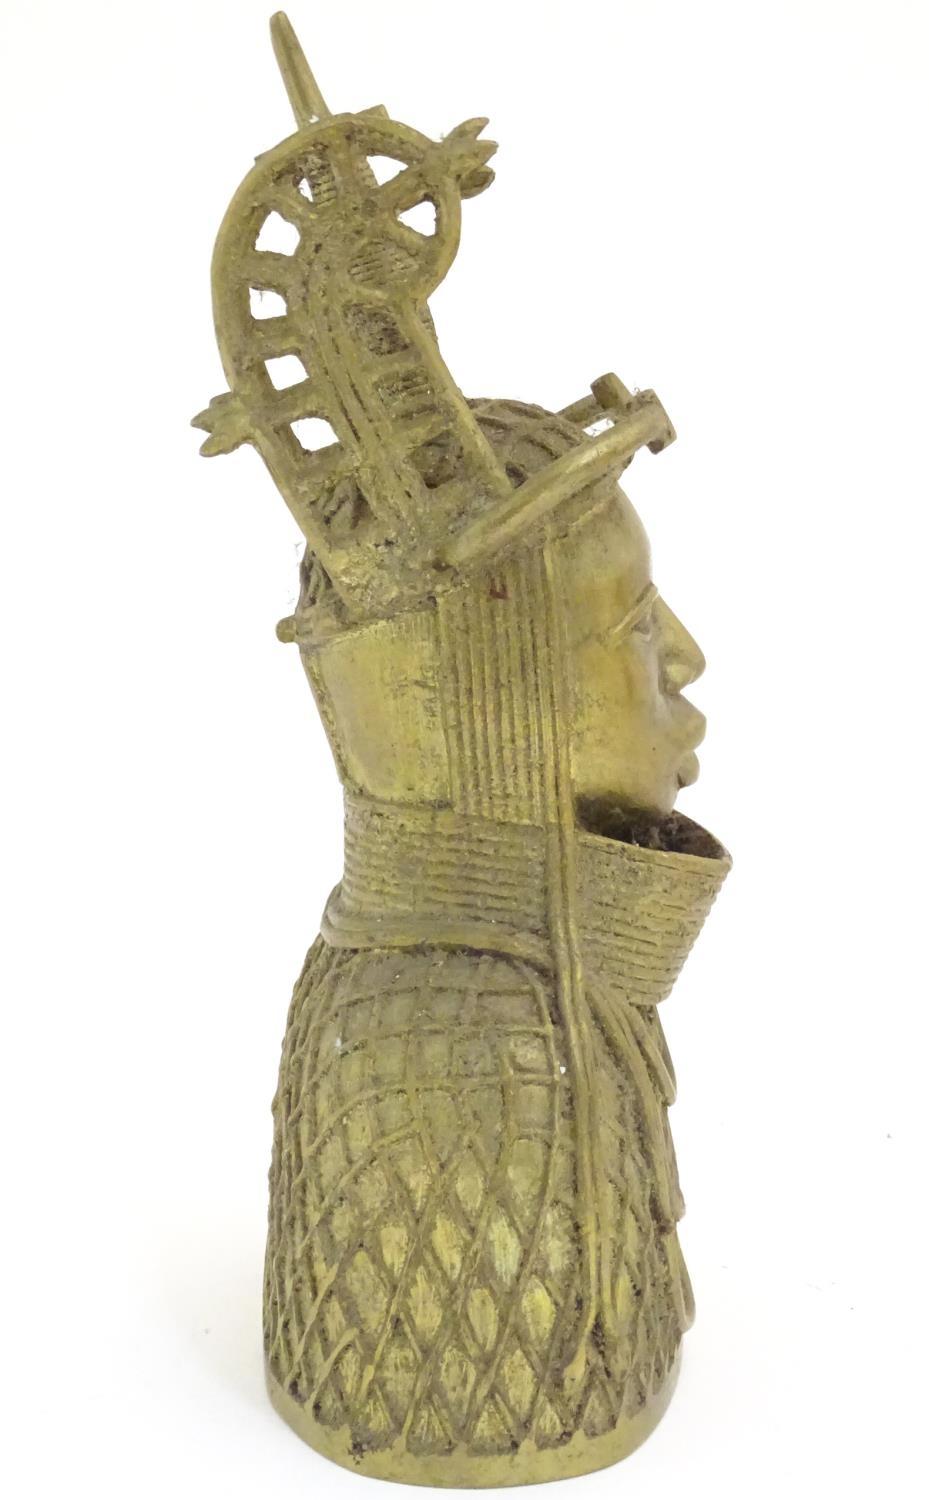 An early 20thC cast model of the Benin Bronze bust depicting Oba of Benin in ceremonial dress. - Image 4 of 5